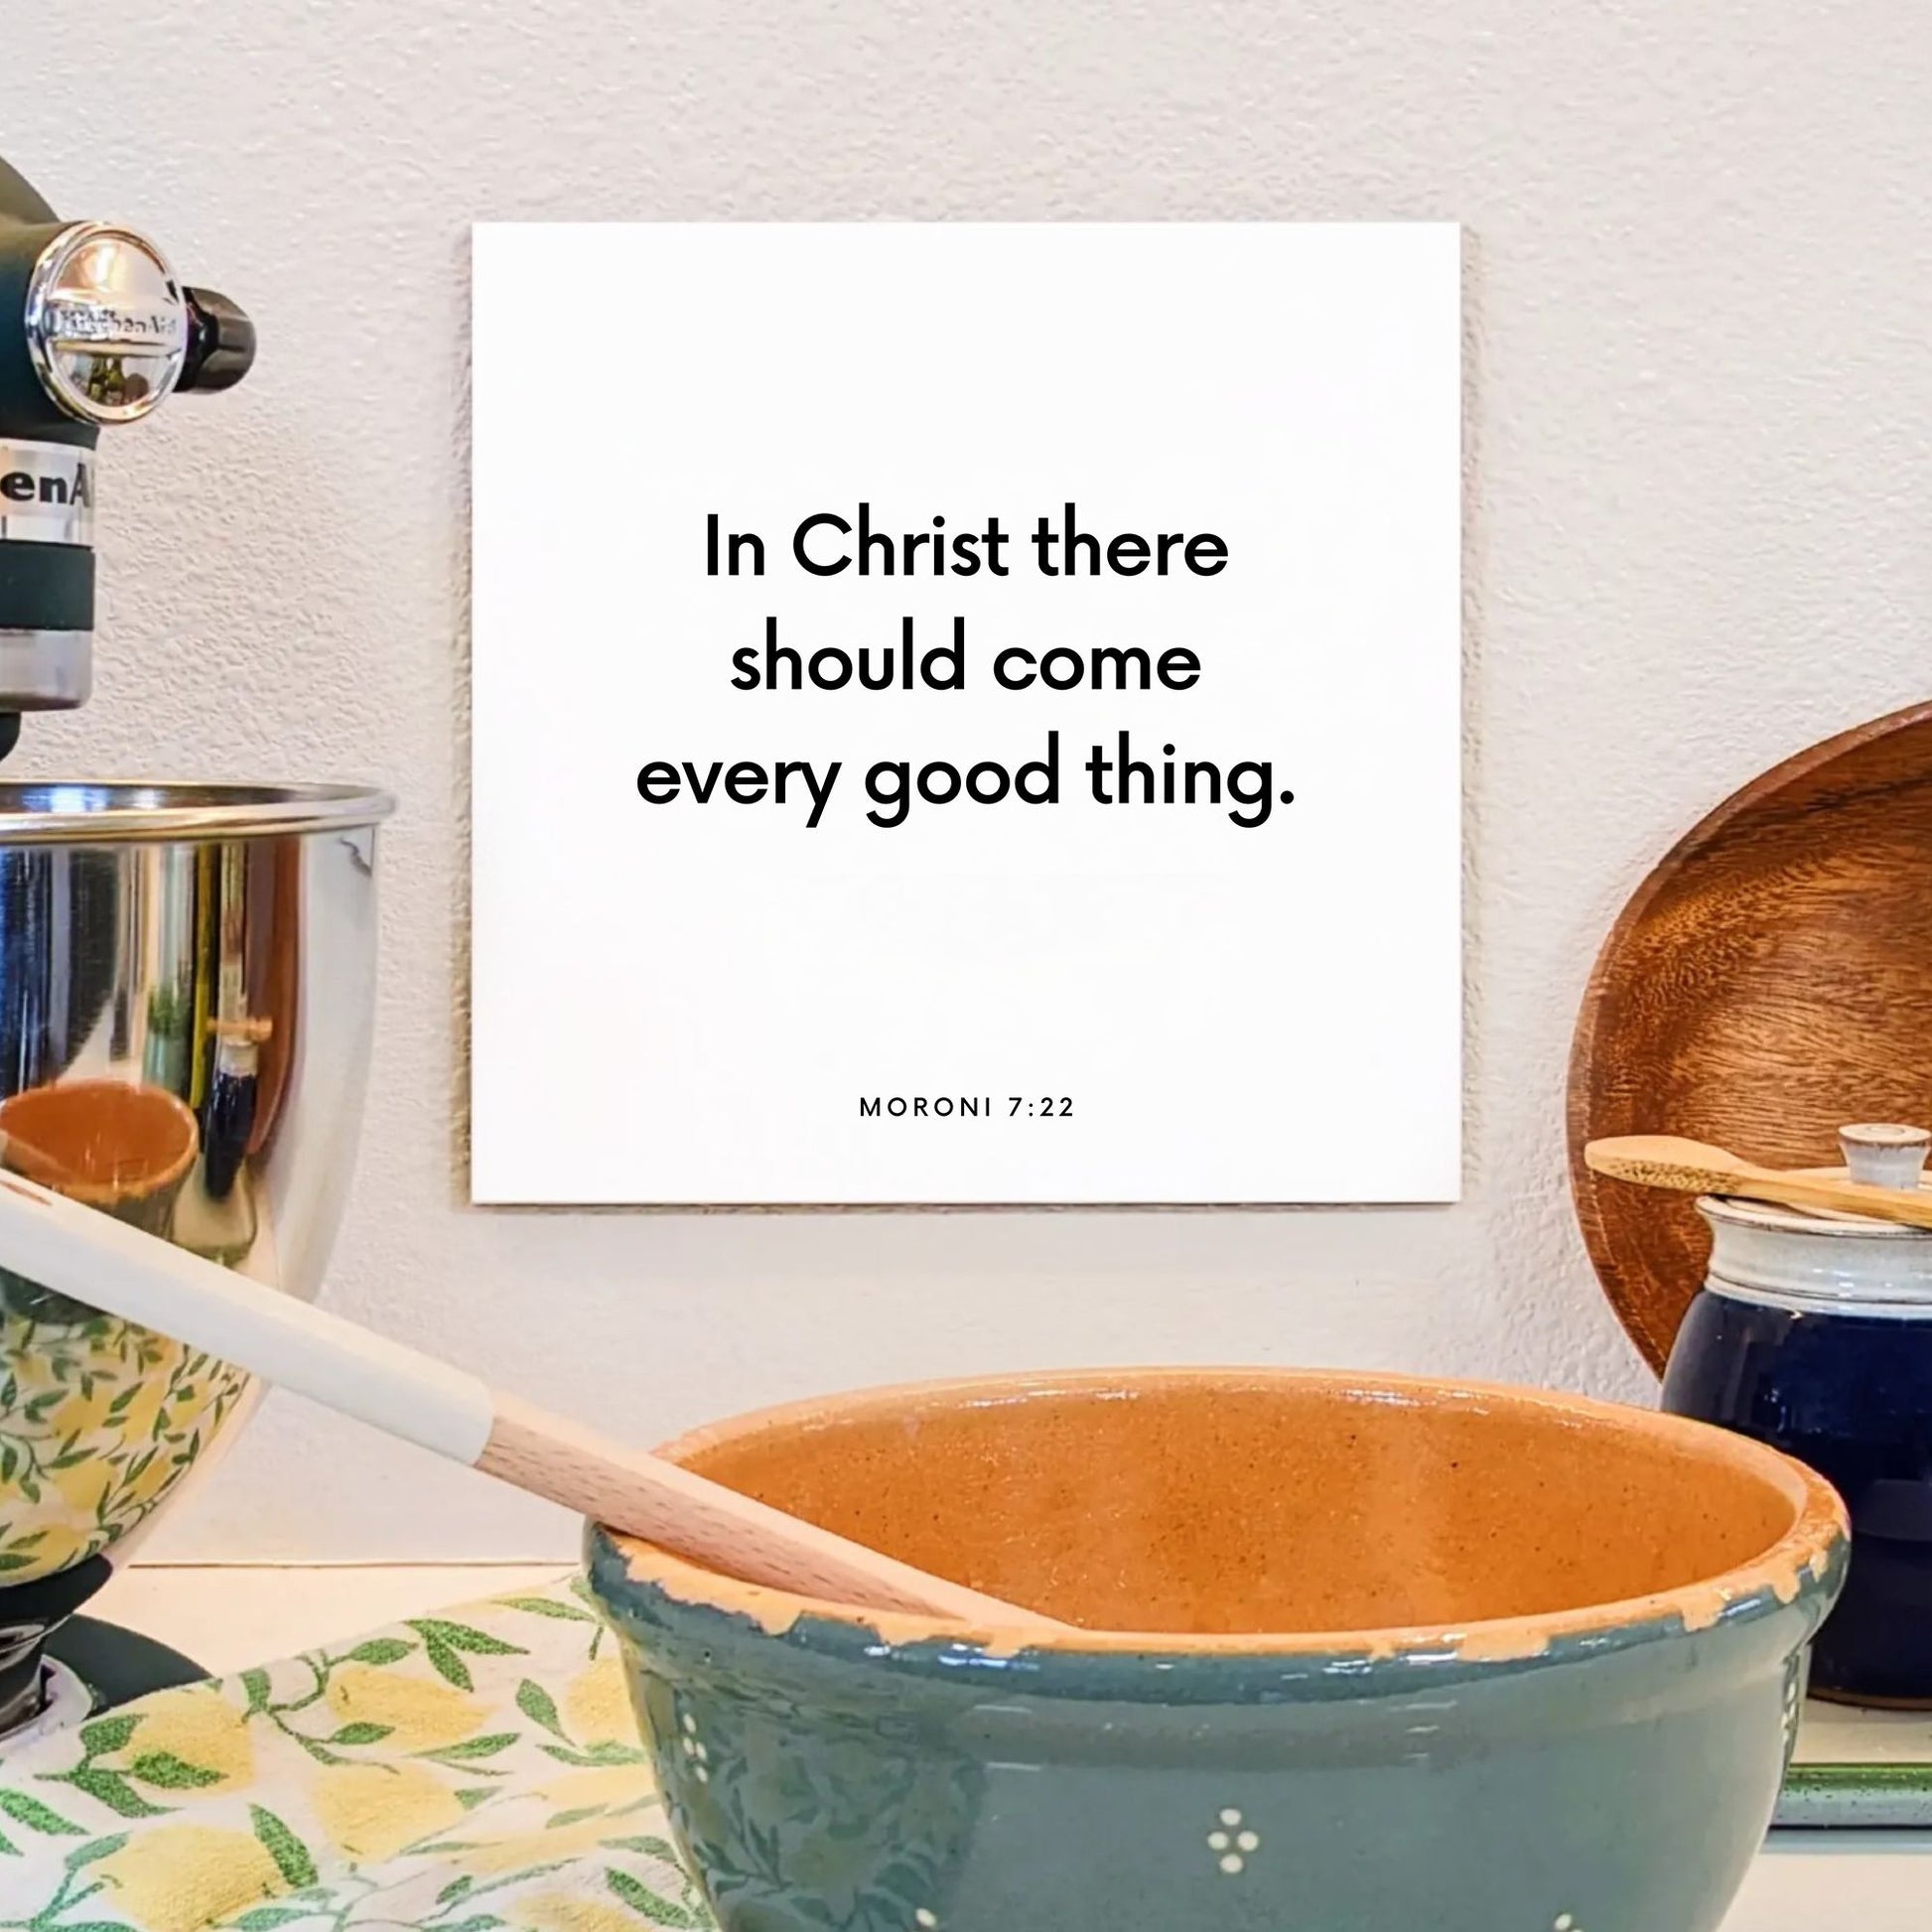 Kitchen mouting of the scripture tile for Moroni 7:22 - "In Christ there should come every good thing"